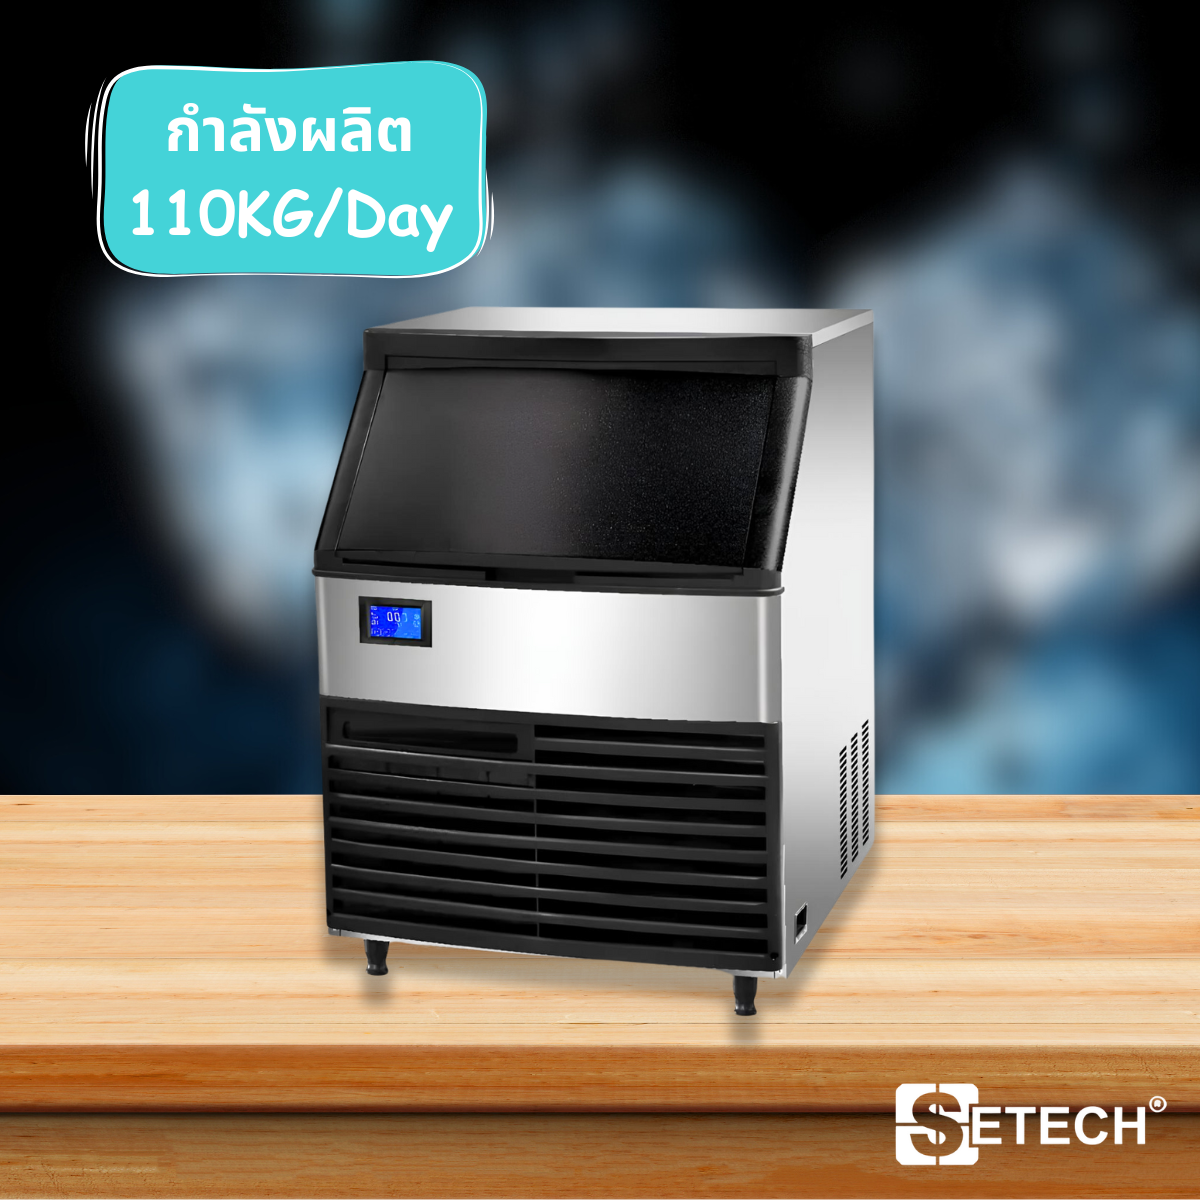 Ice maker 850w Setech production capacity 110KG per day